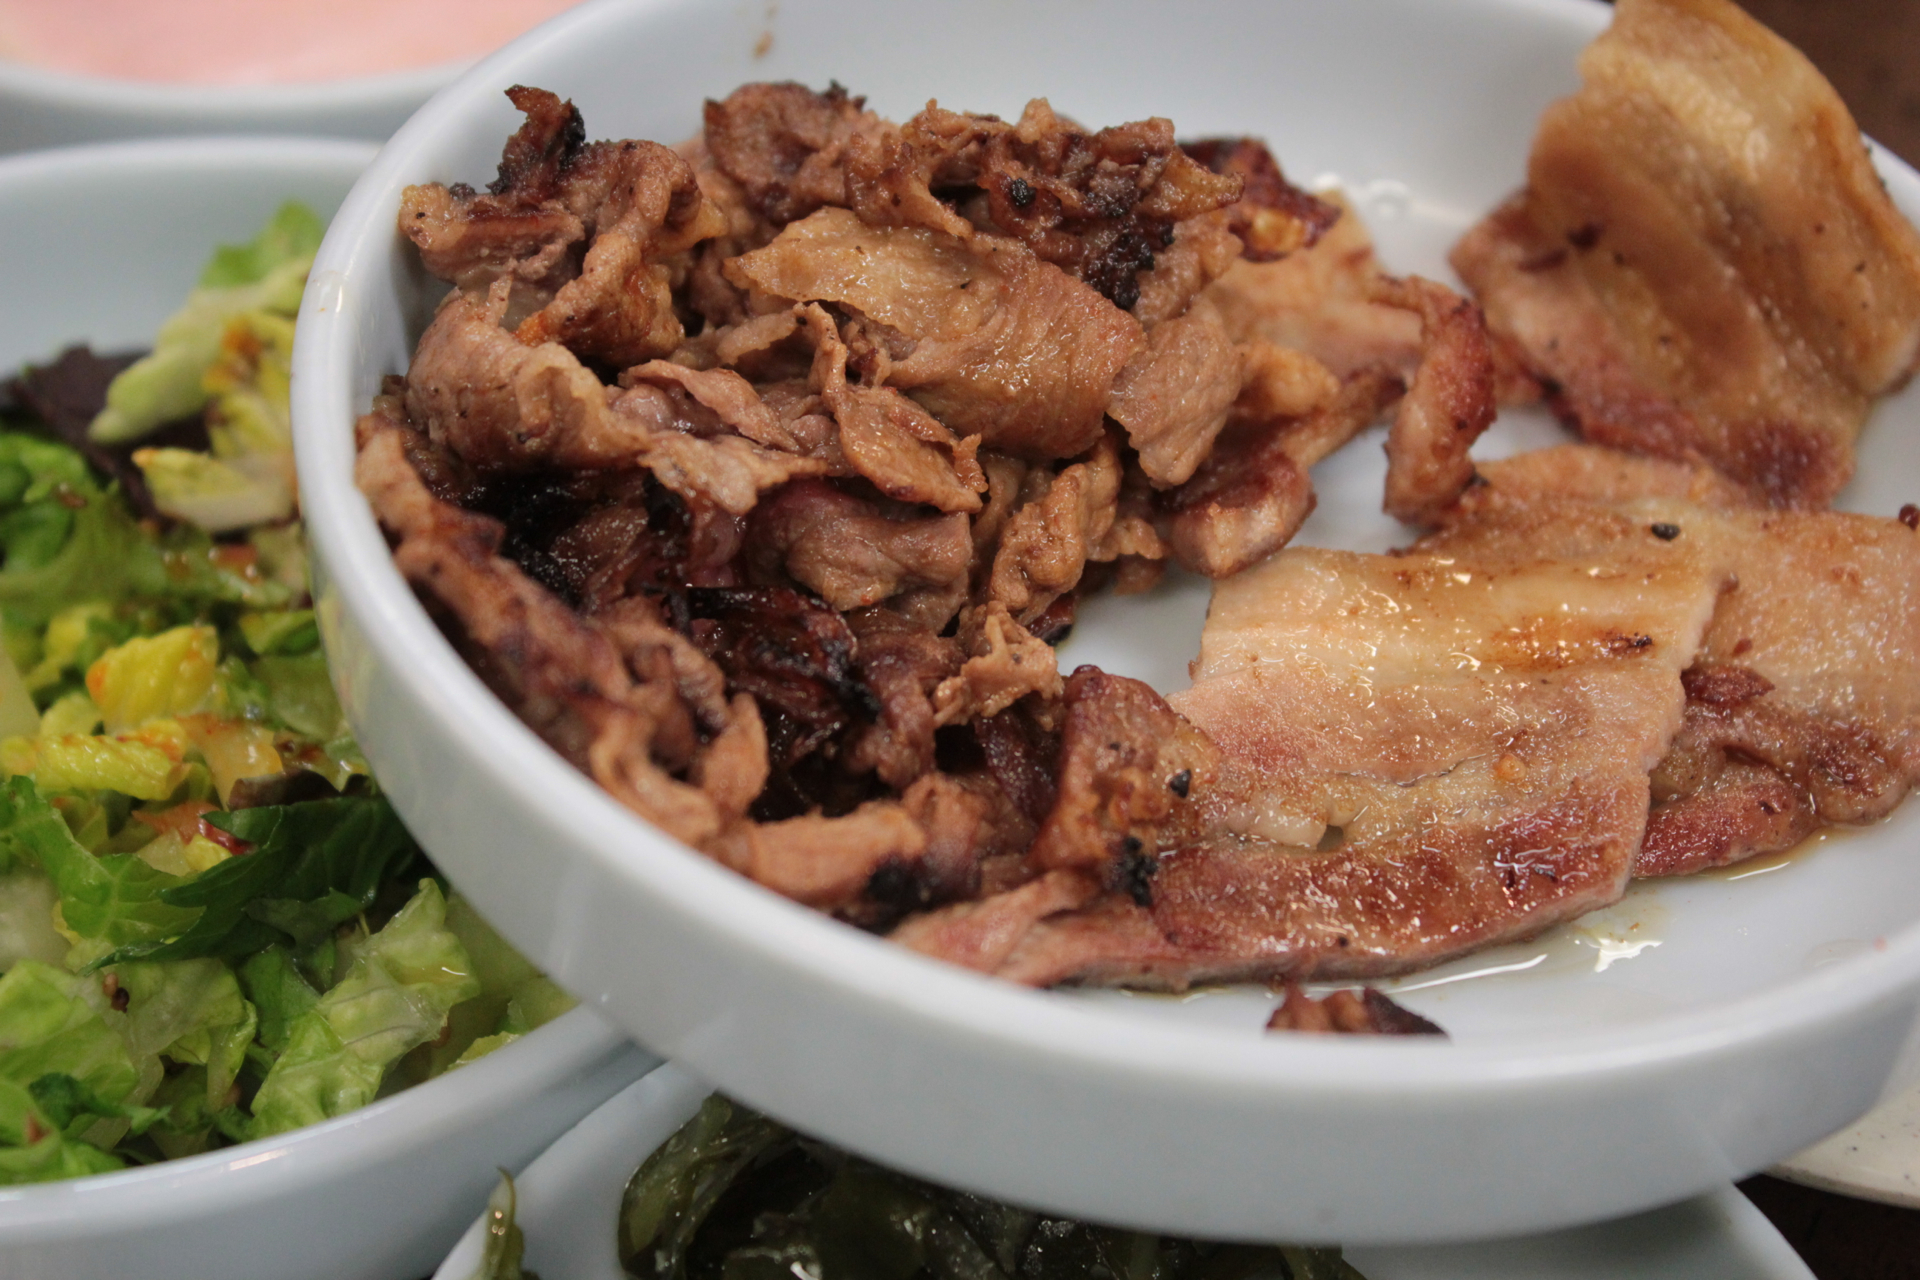 Cooked thinly sliced beef and pork belly.